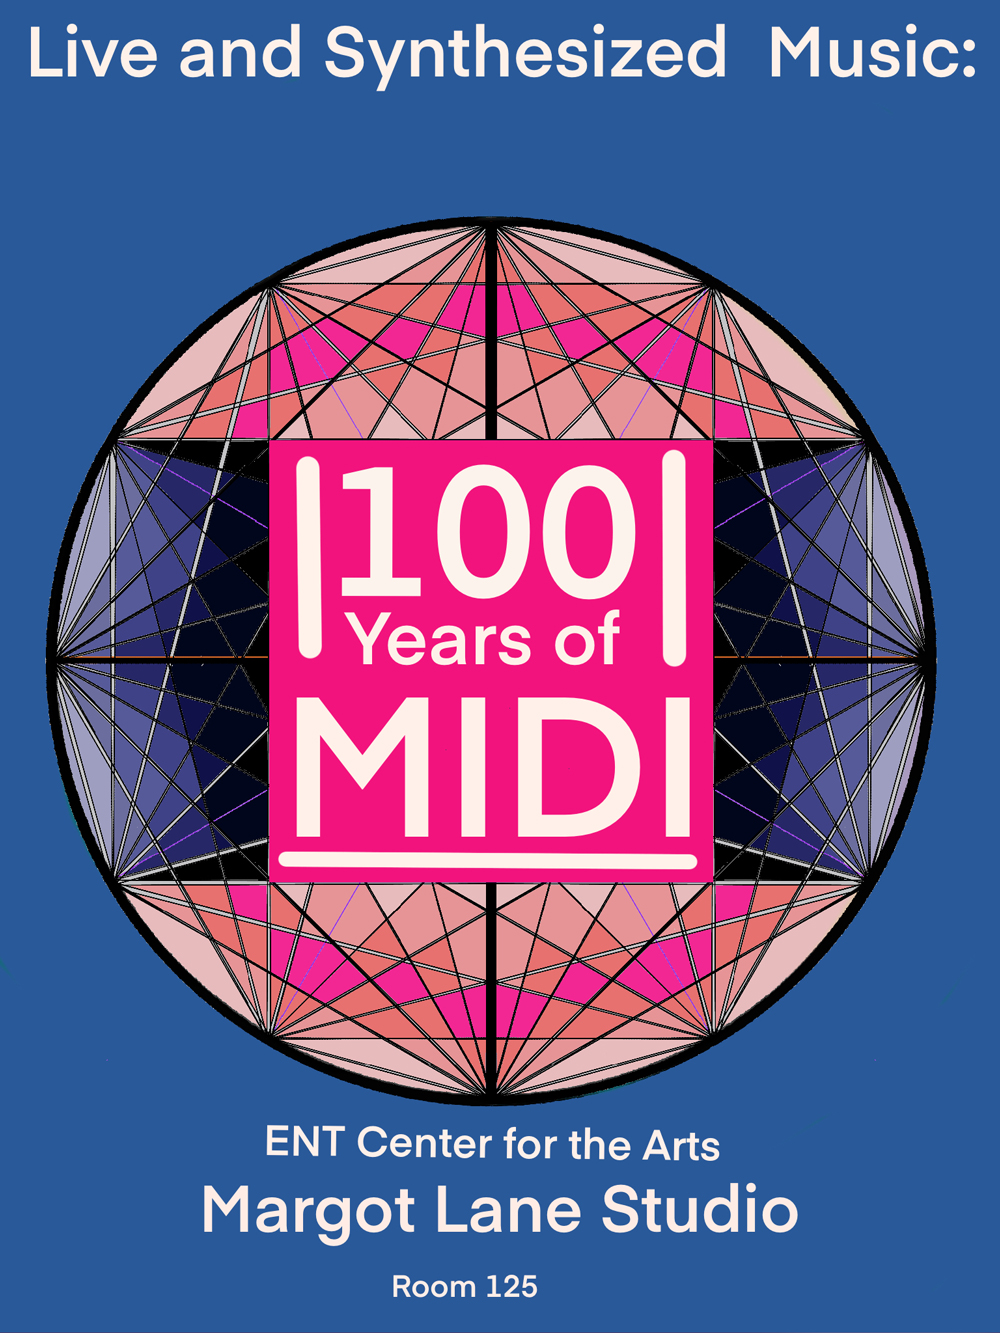 stylized geometric graphic on blue background with "100 years of midi" text centered